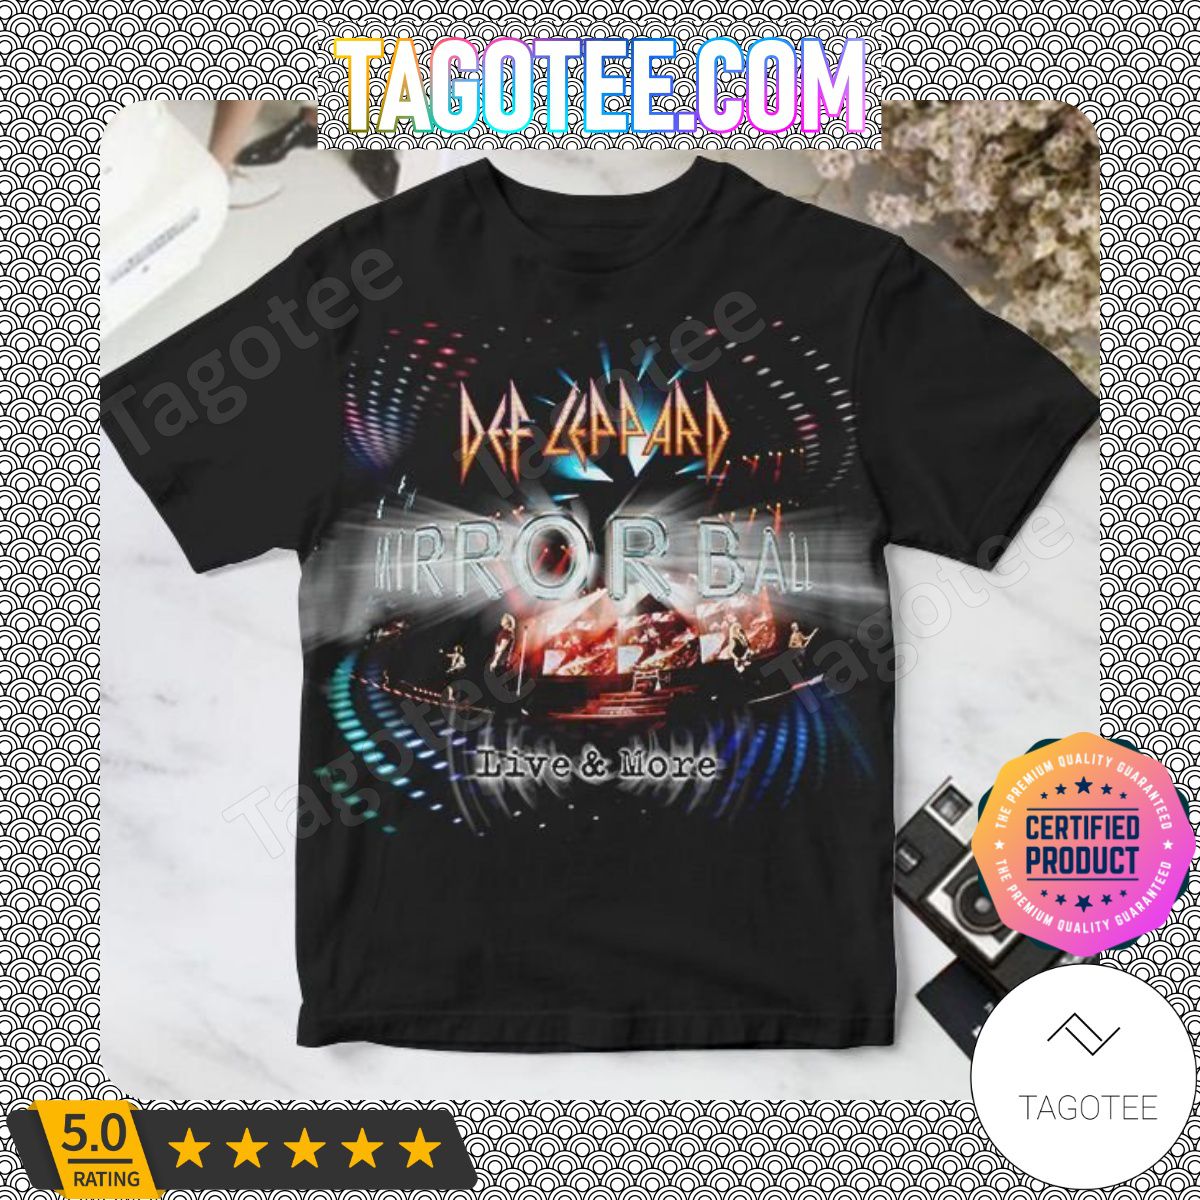 Def Leppard Mirror Ball Live And More Album Cover For Fan Shirt